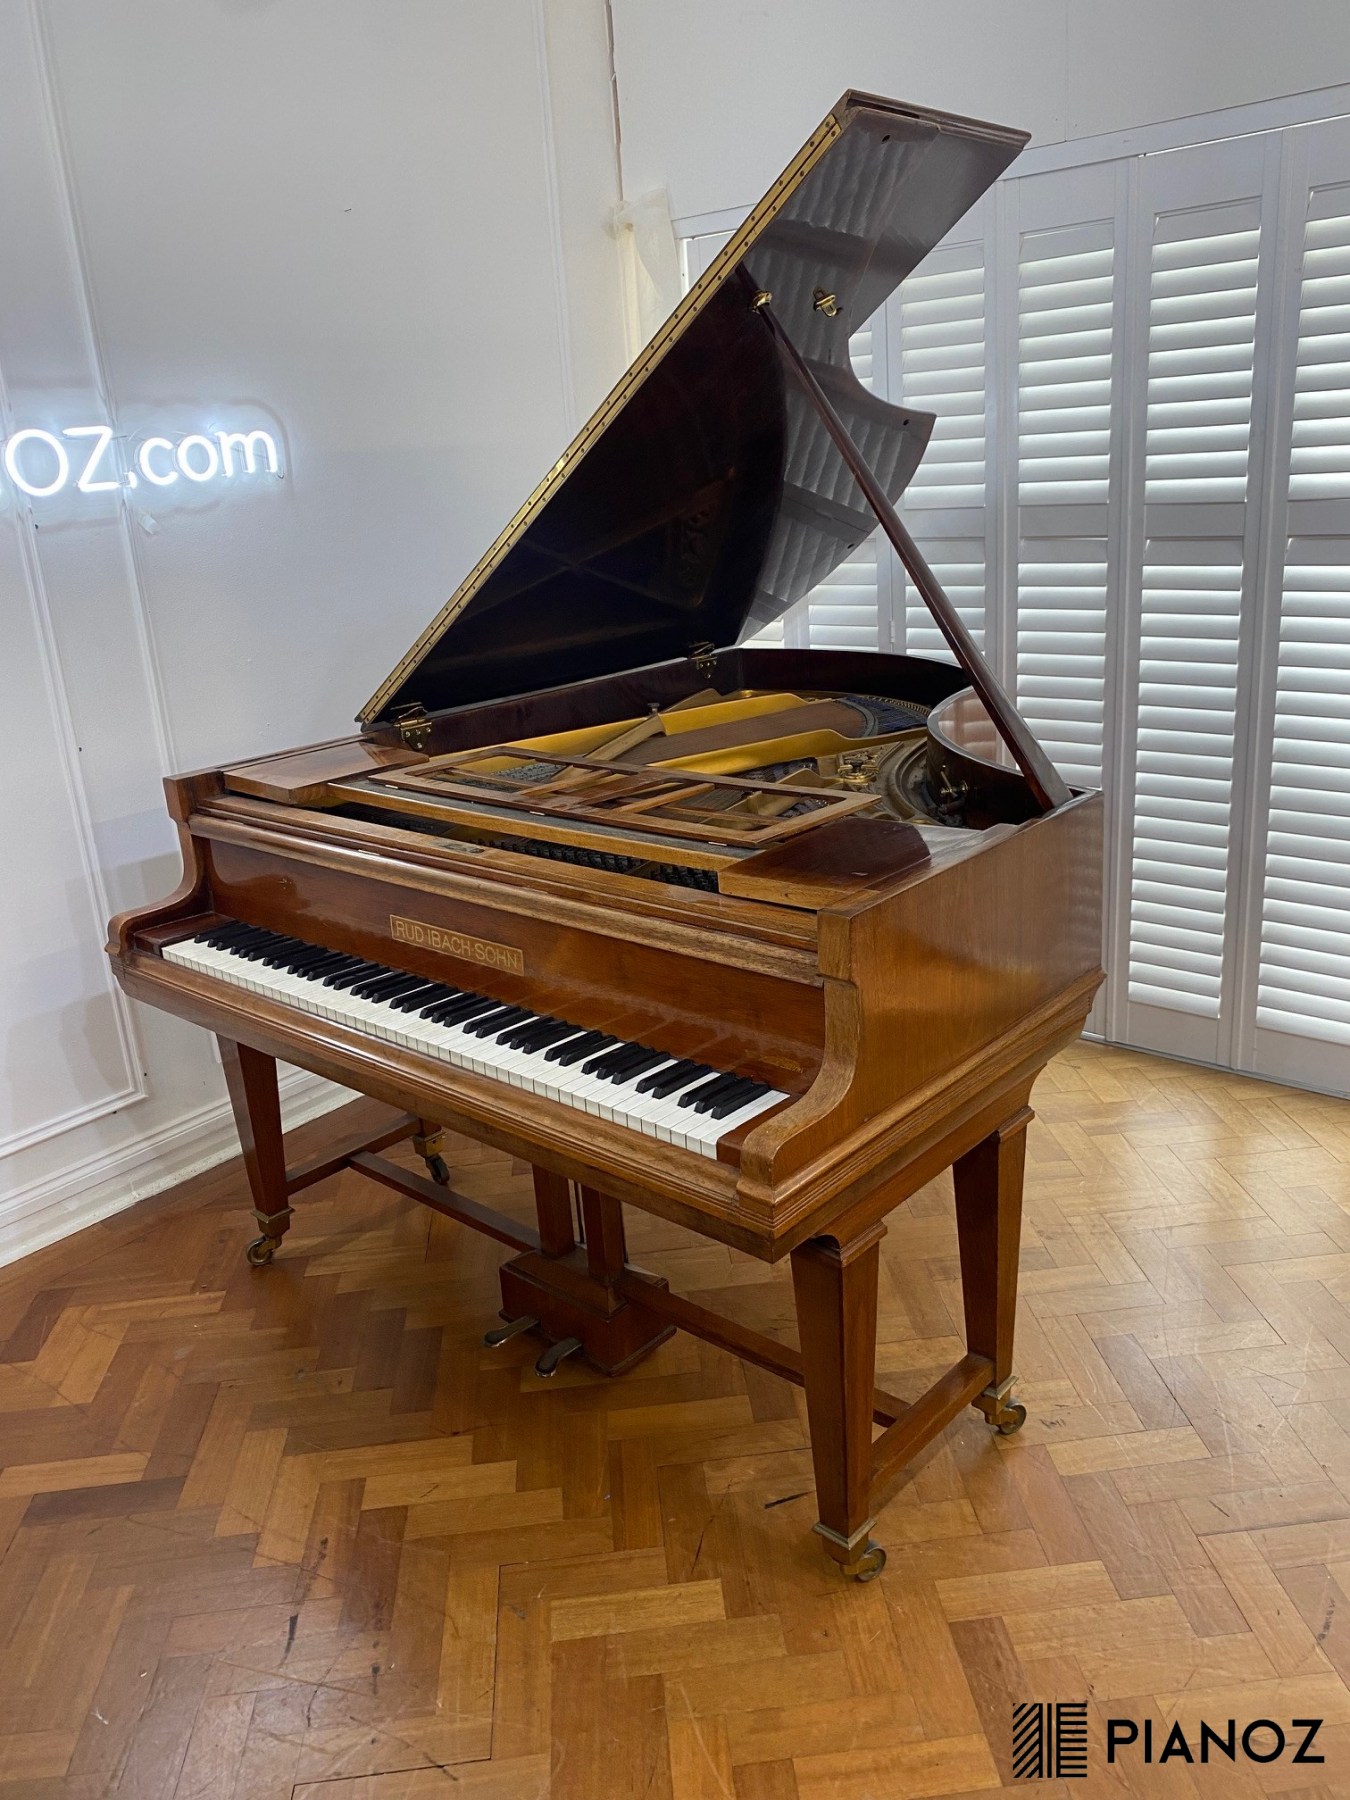 Ibach Rosewood Baby Grand Piano piano for sale in UK